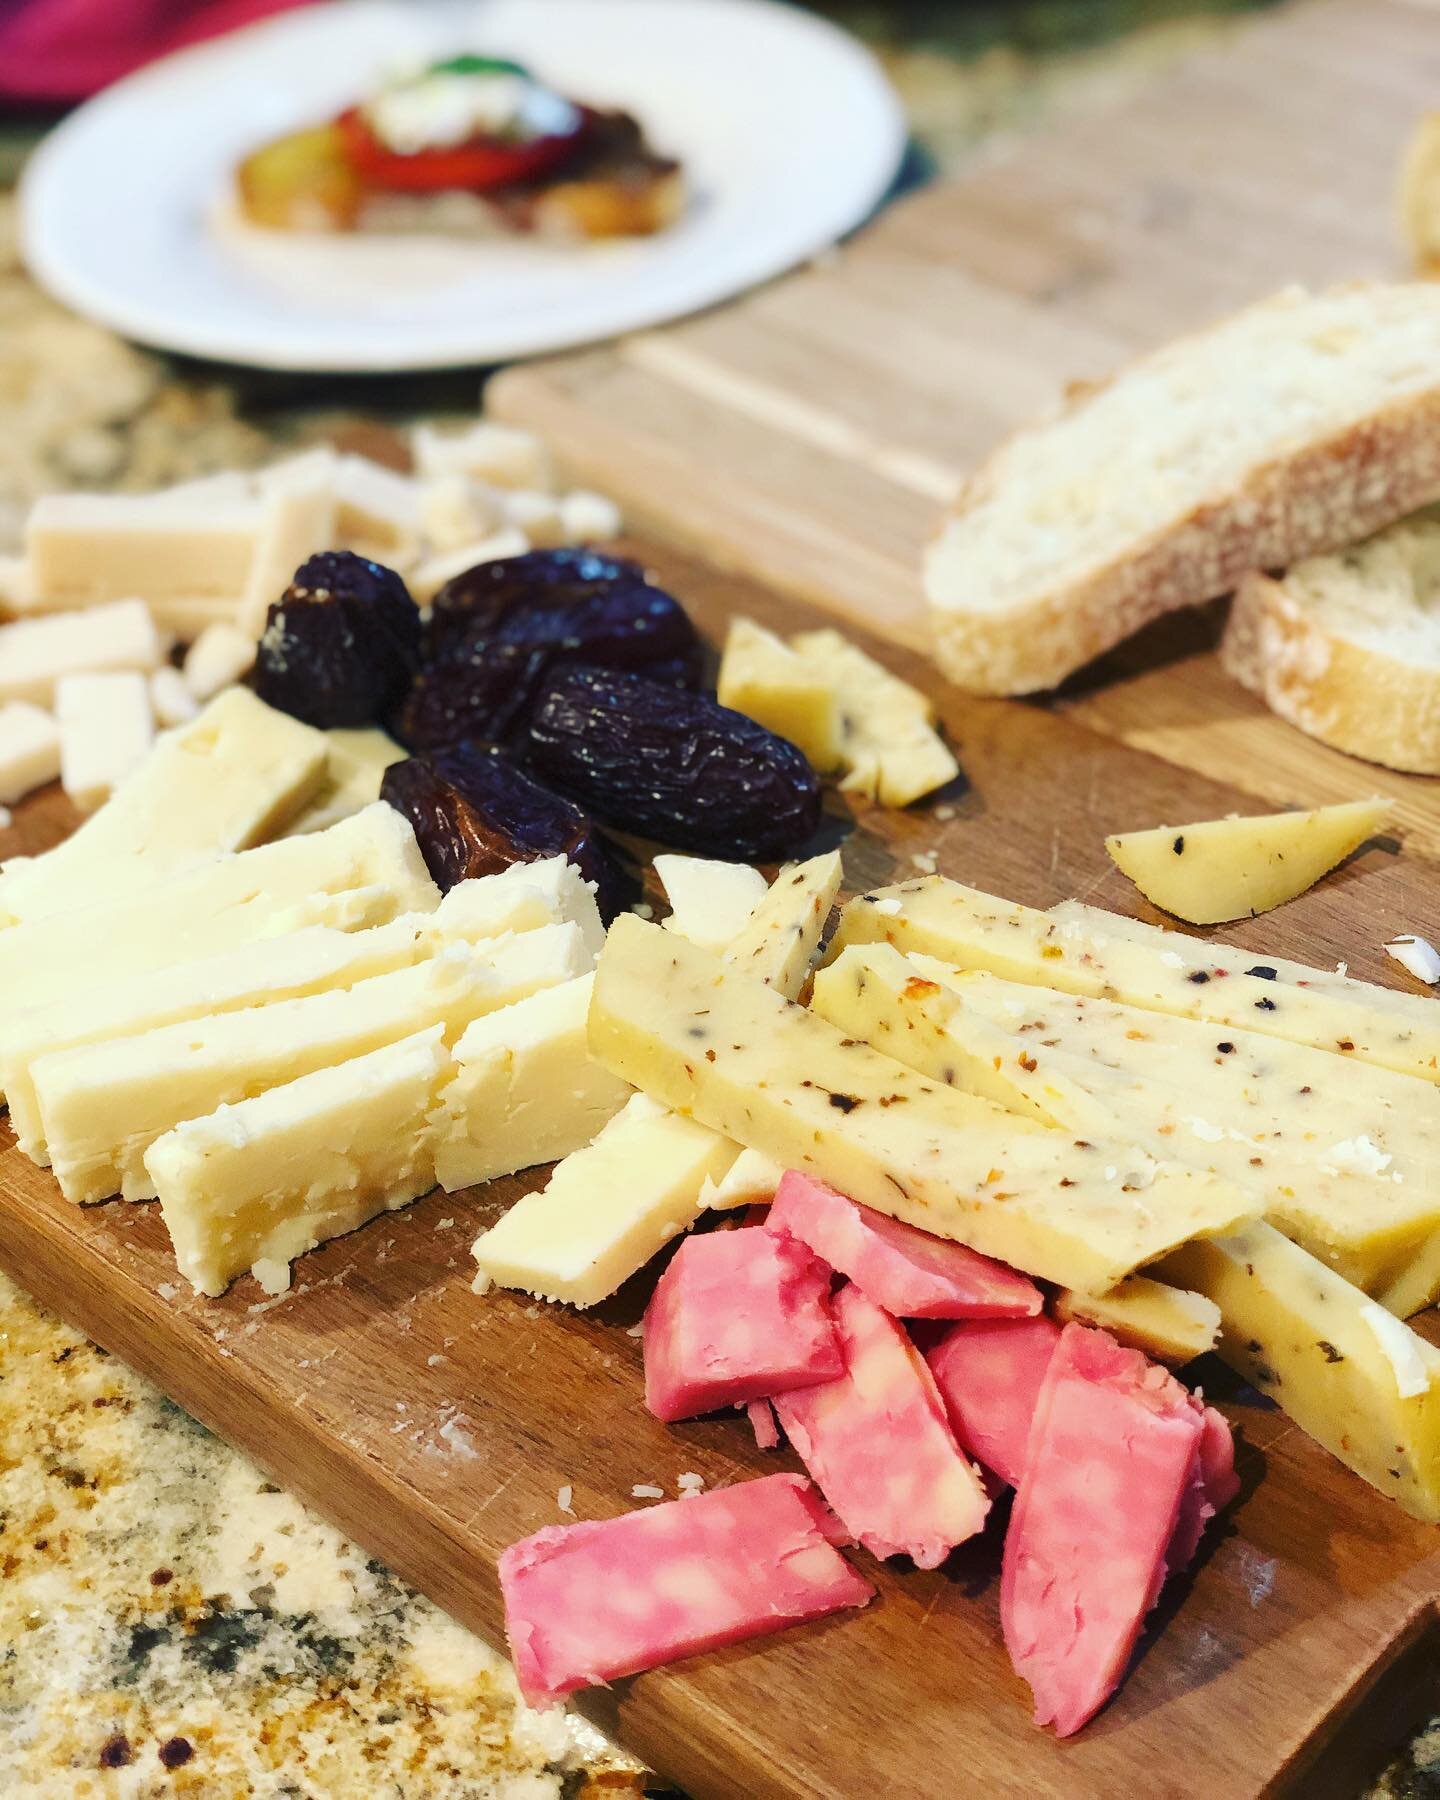 Come get your cheese on at winter garden, winter park, or lake Mary farmers market! #cheeselife #farmersmarket #chebellacheese #cheeseandwine #foodie